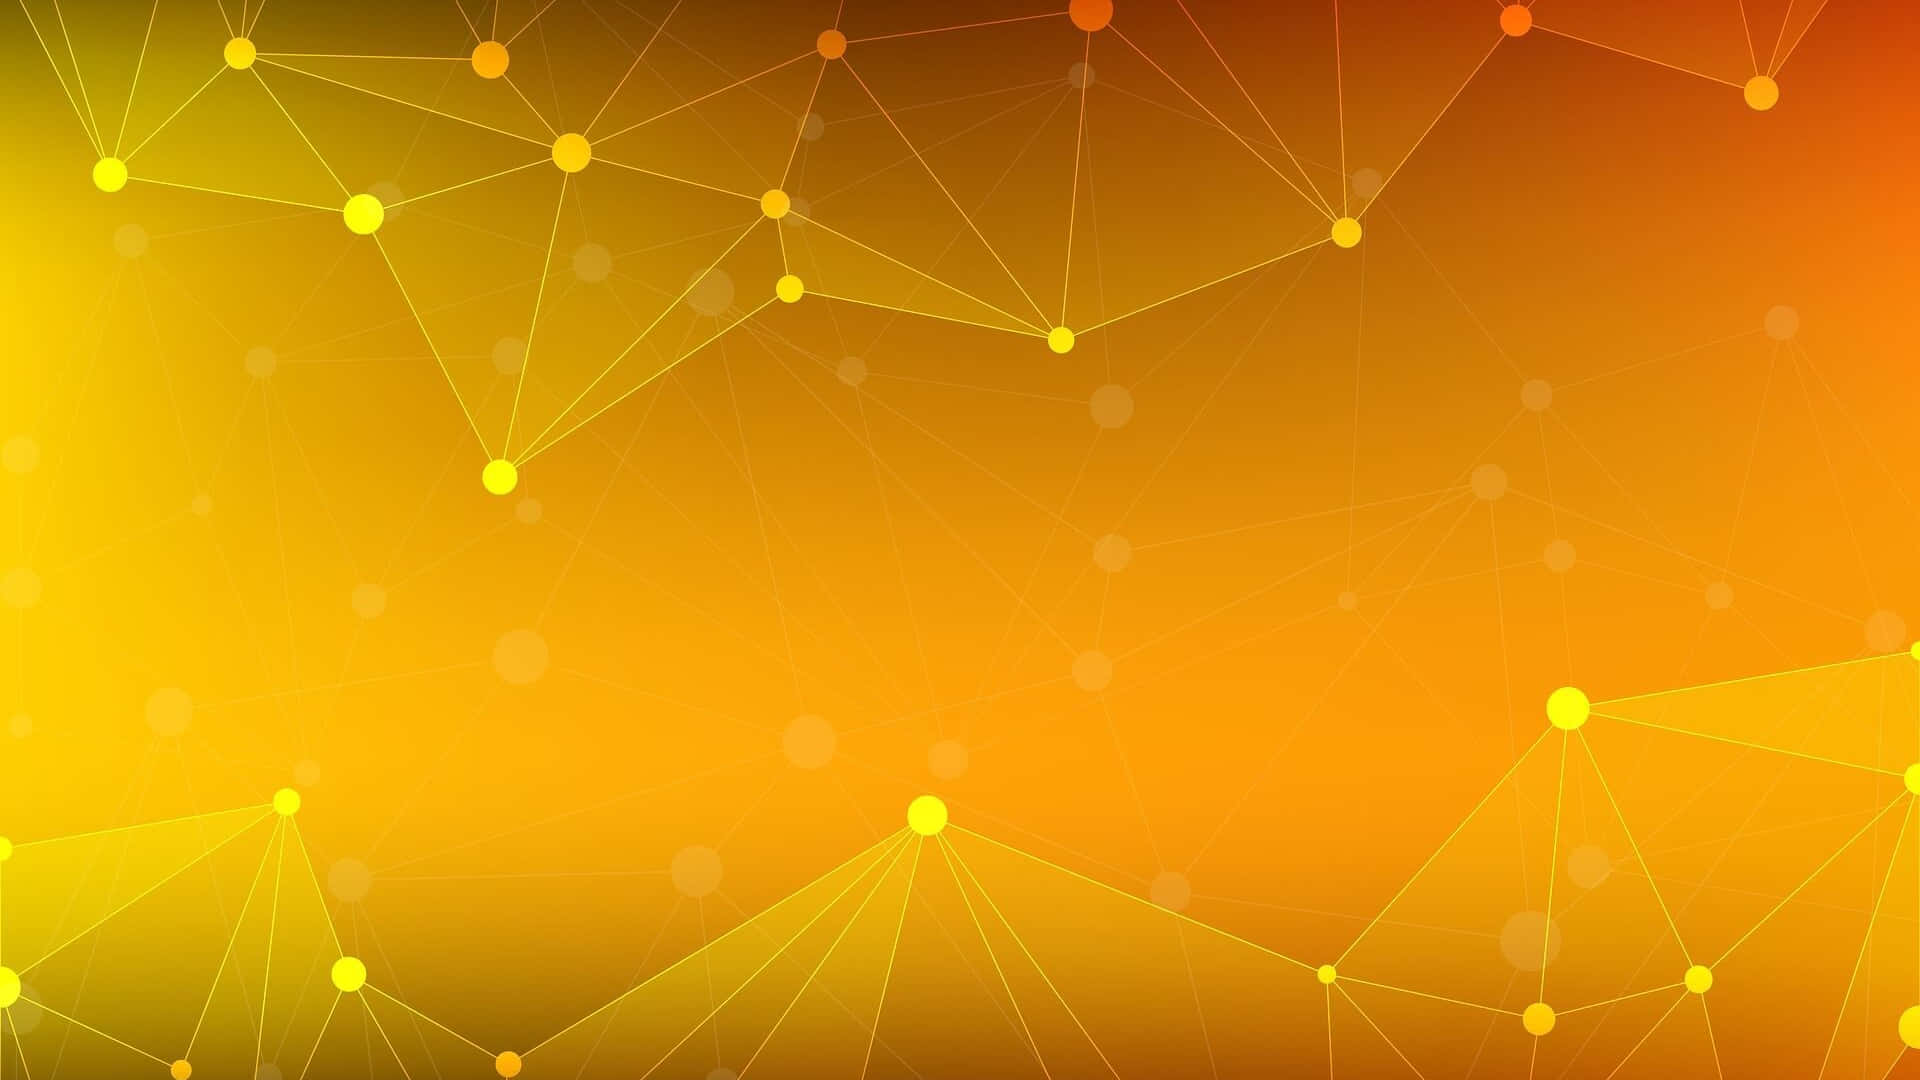 A Yellow Background With A Network Of Dots And Lines